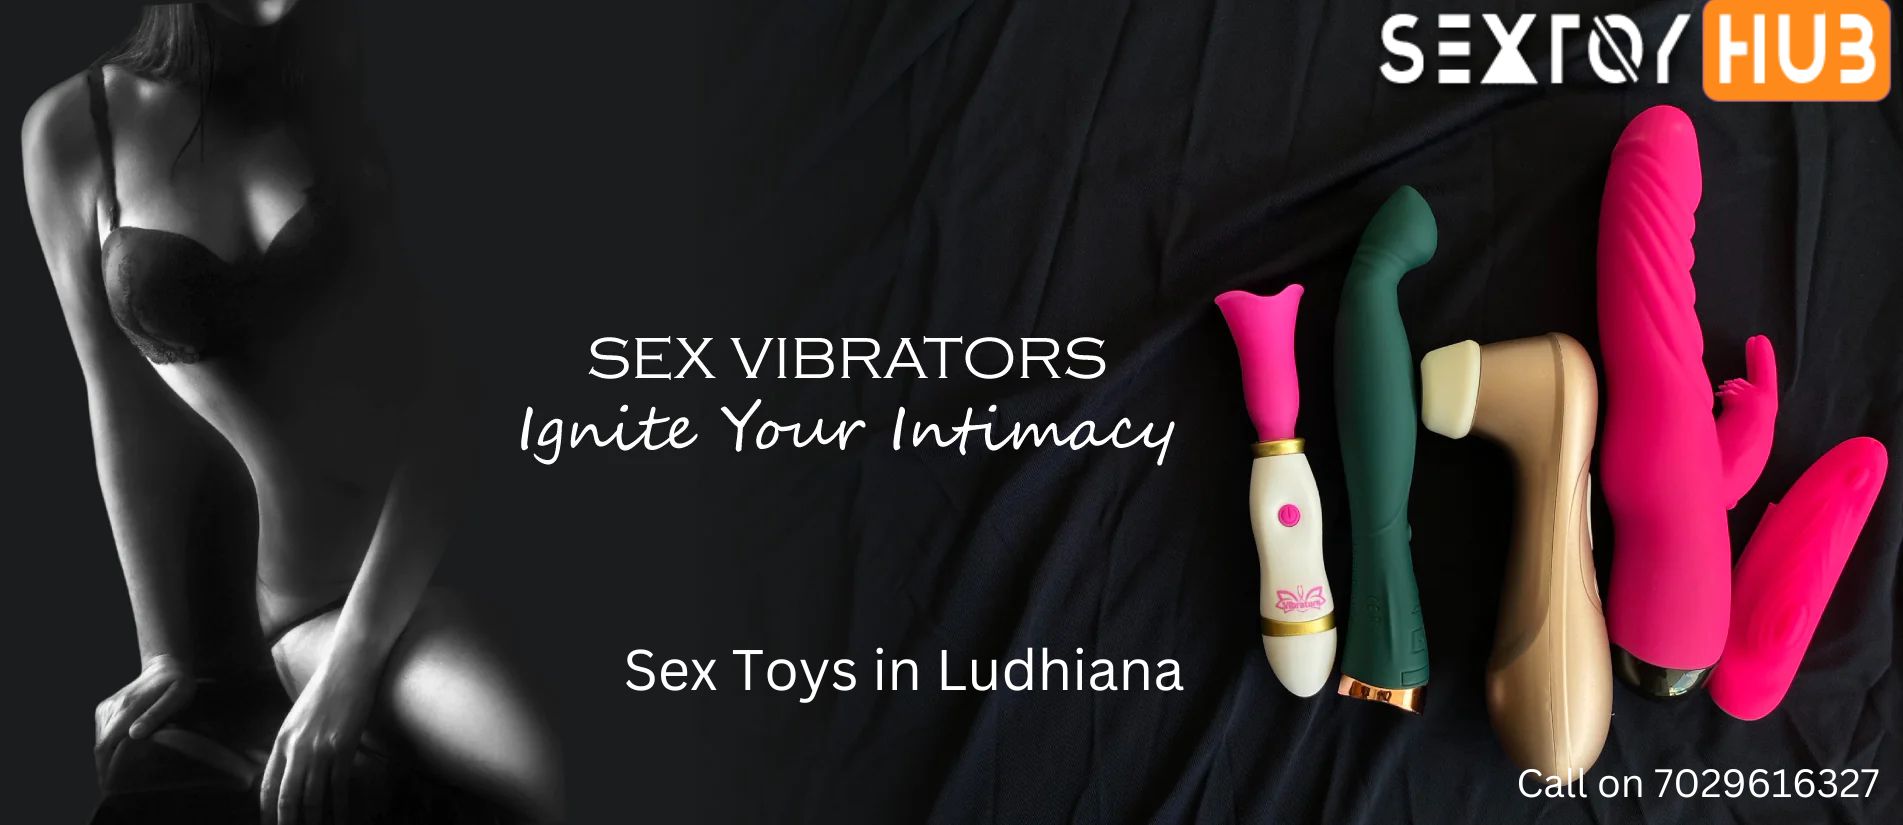 Buy Sex Toys in Ludhiana at Very Affordable Price Call 70296 - Punjab - Ludhiana ID1520550